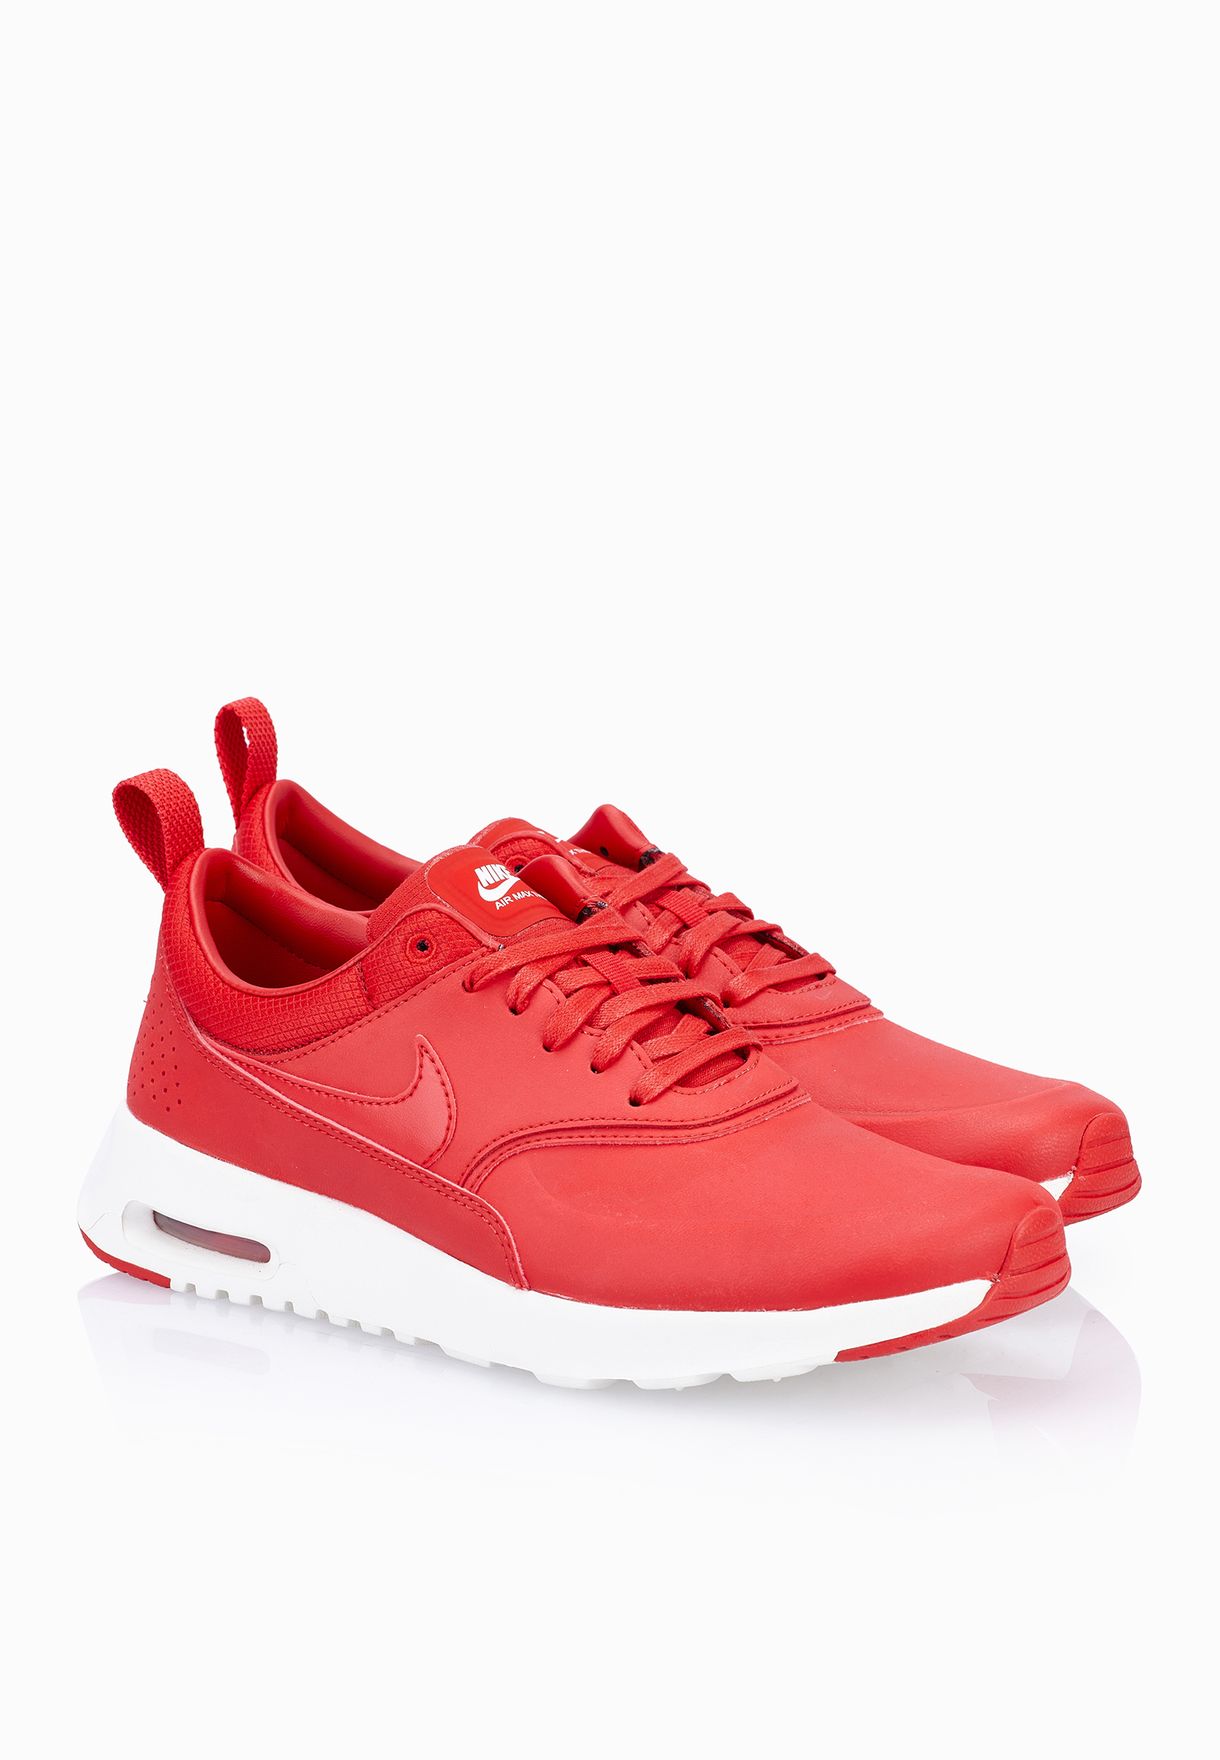 Buy Nike red Air Max Thea Prm for Women 